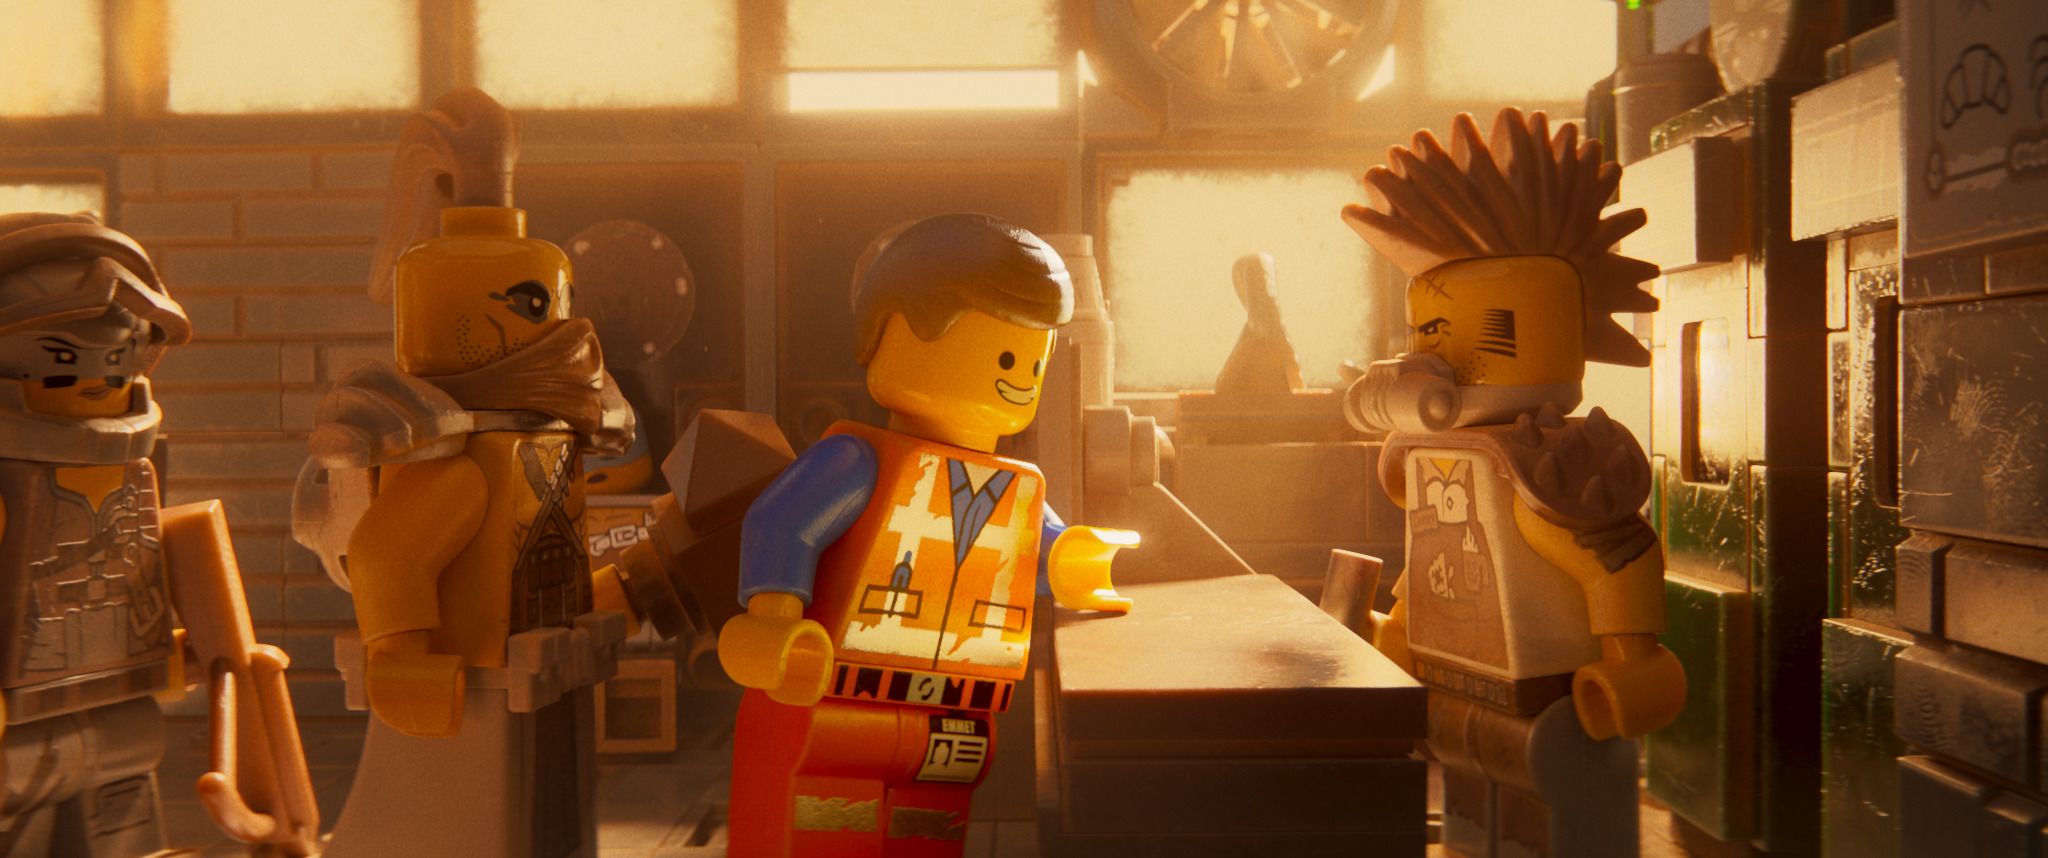 New LEGO Movie 2 Images Tease Superman, Wonder Woman, and More | Collider